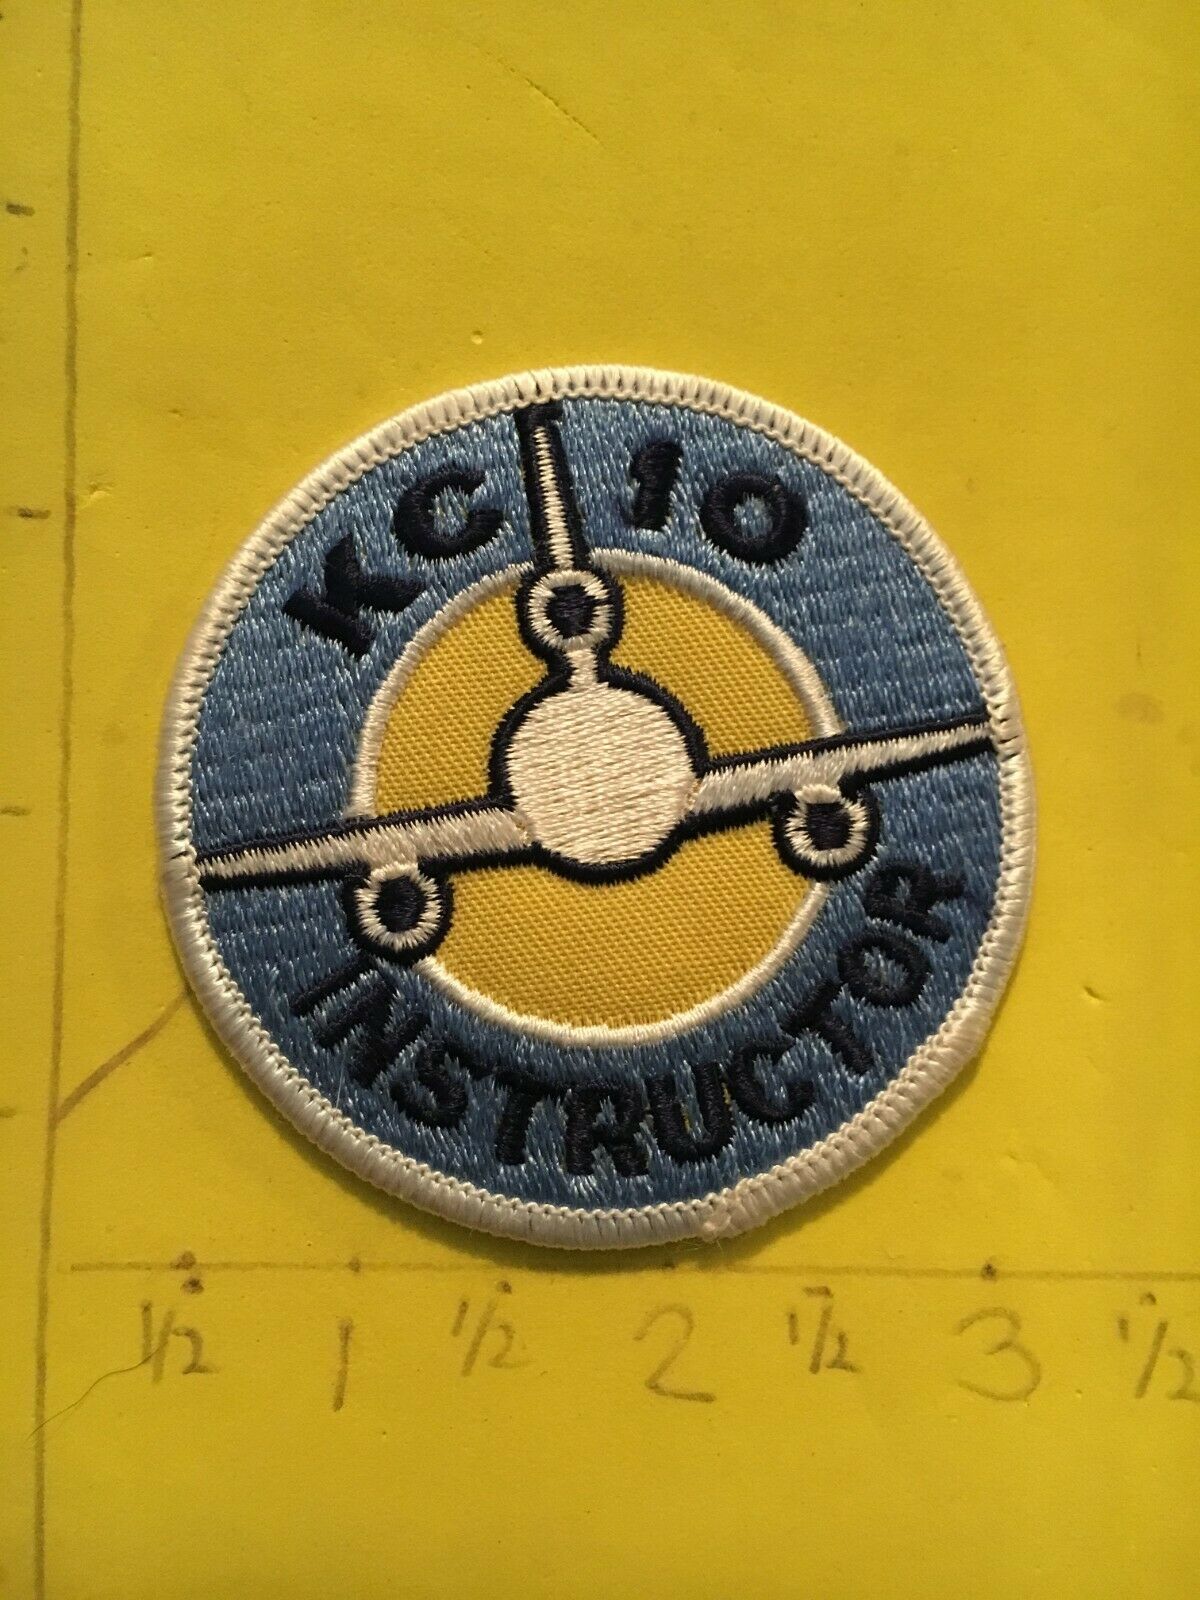 Usaf Kc-10 Instructor Squadron Patch 8/1